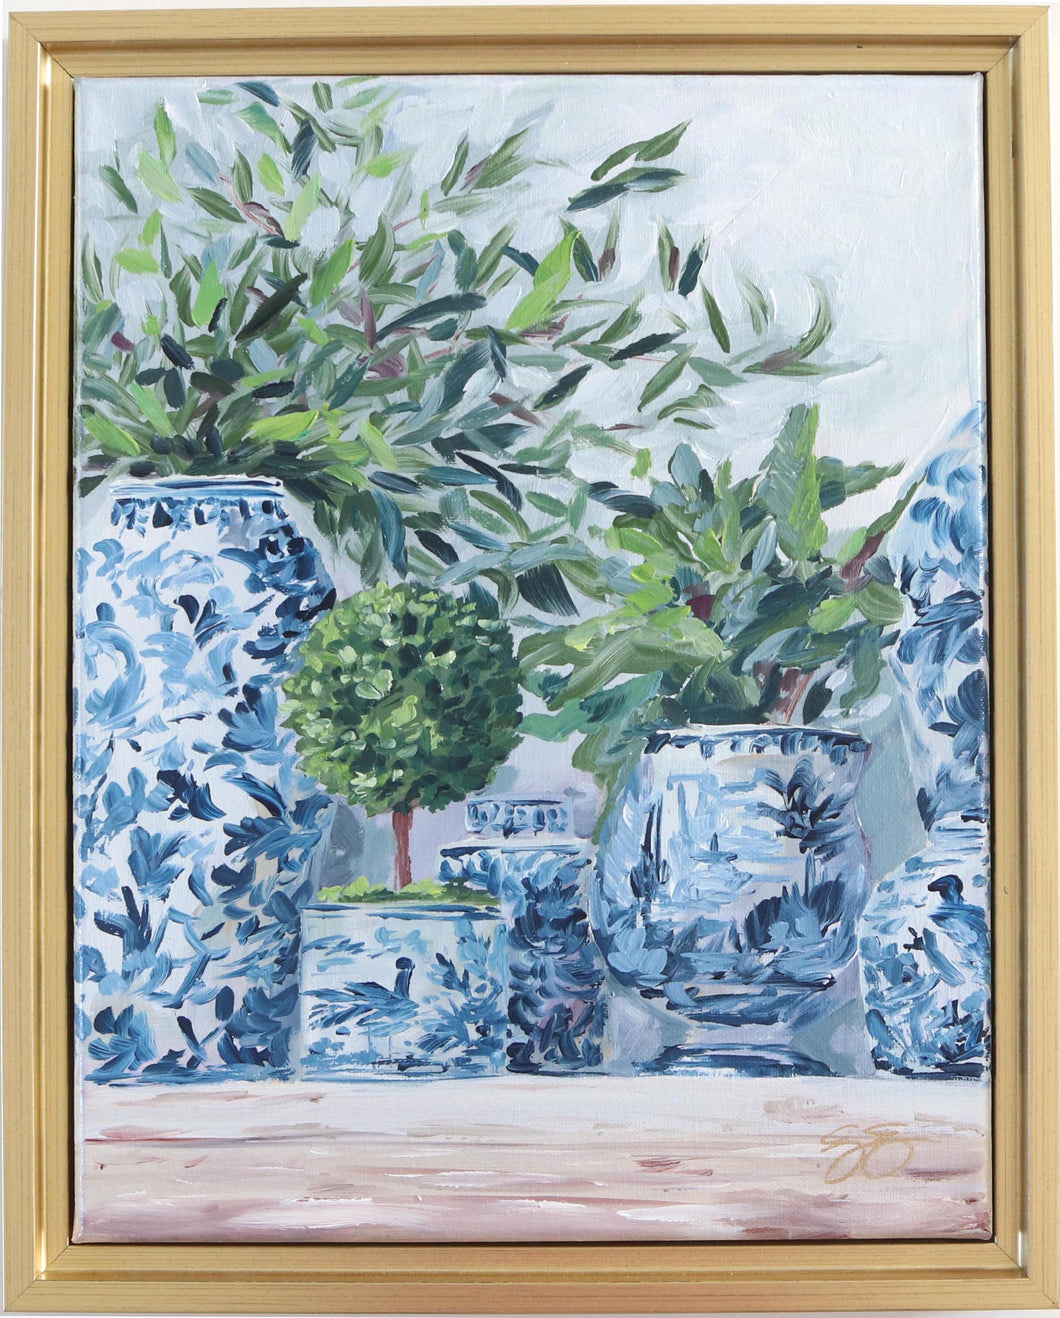 Green and blue and white - 12 x 15 framed